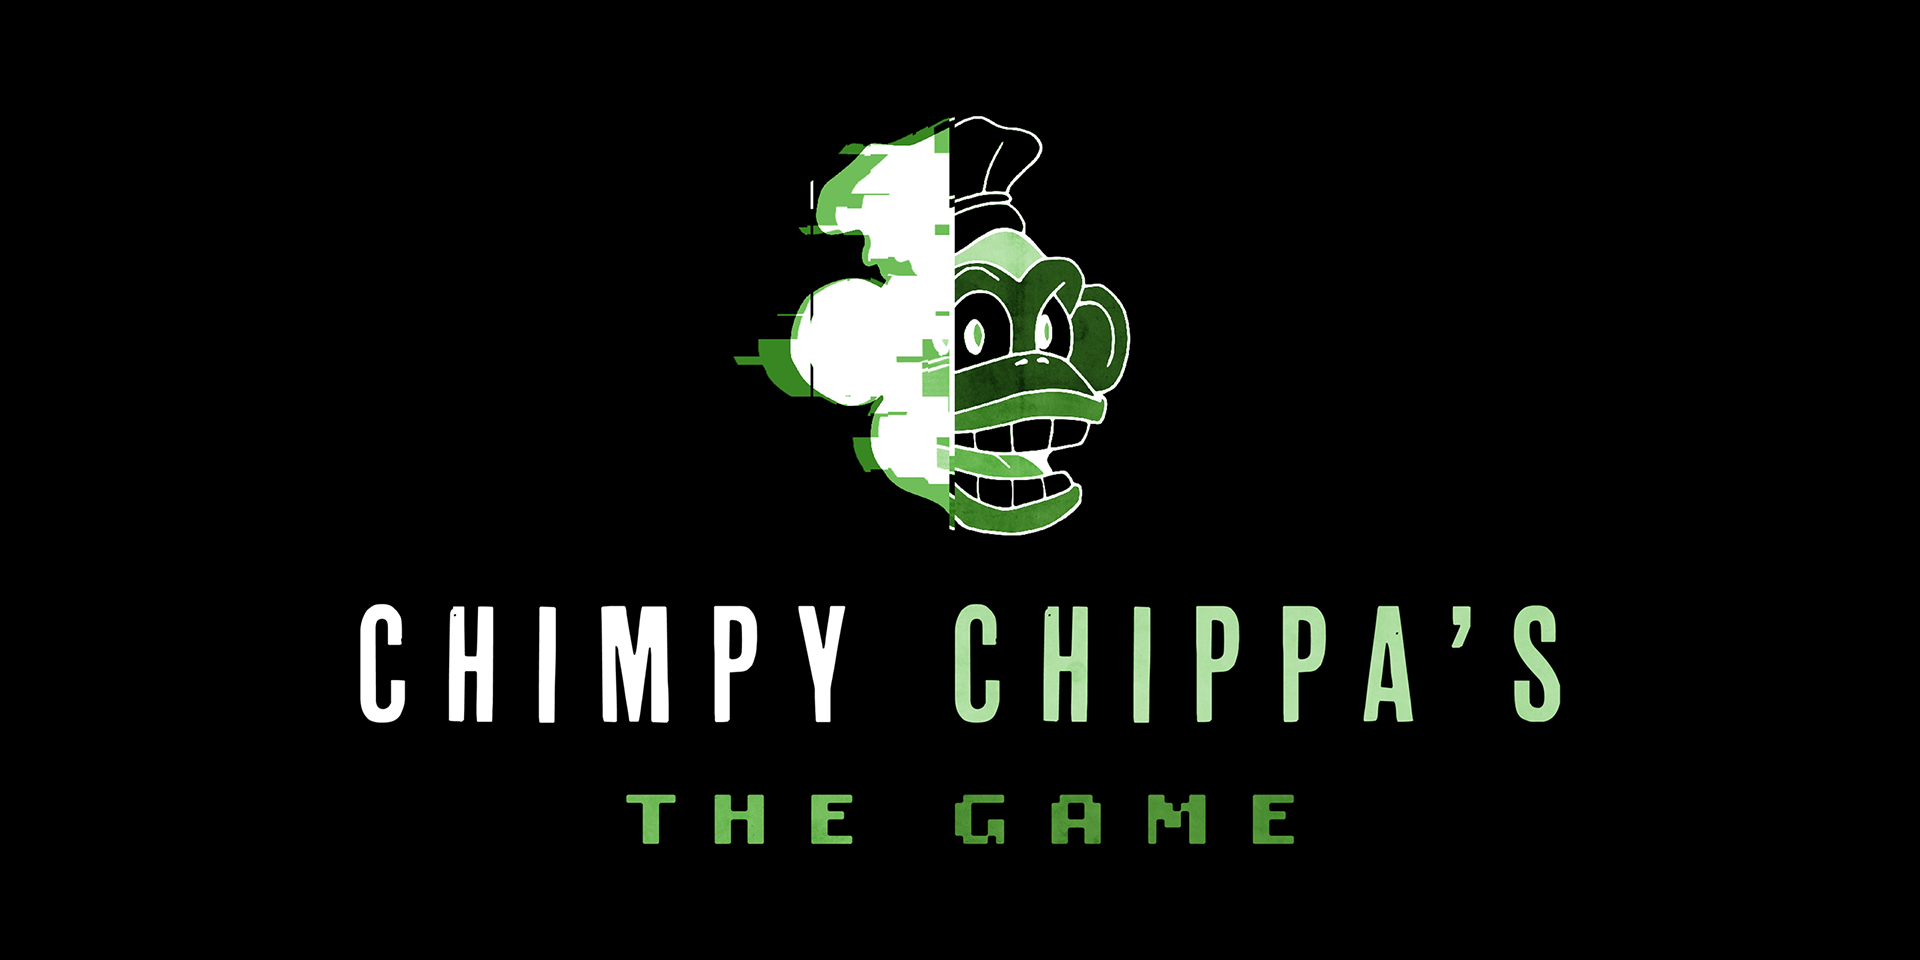 Chimpy Chippa's: The Game